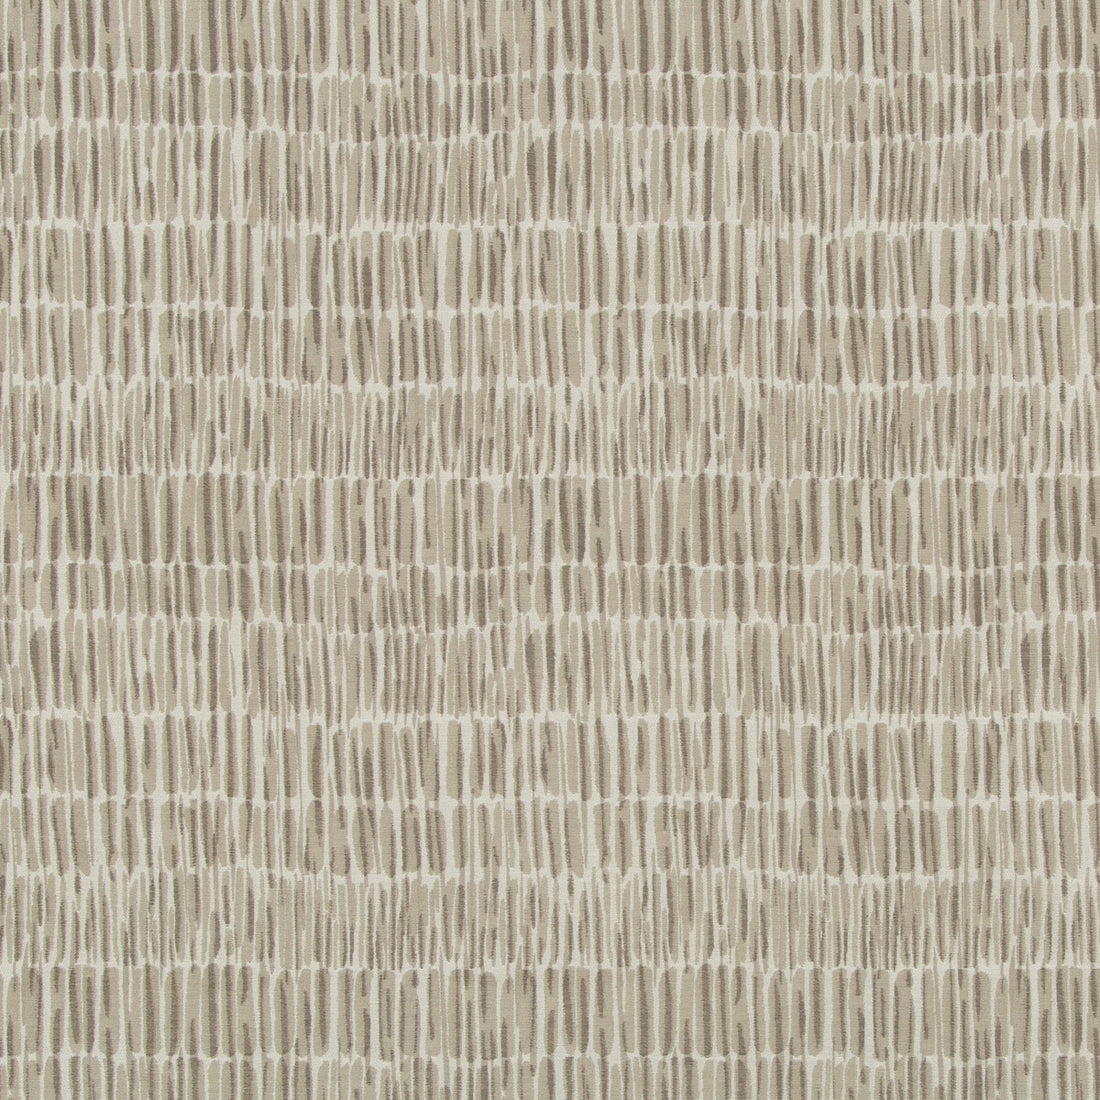 Perforation fabric in storm color - pattern 35398.16.0 - by Kravet Design in the Nate Berkus Well-Traveled collection